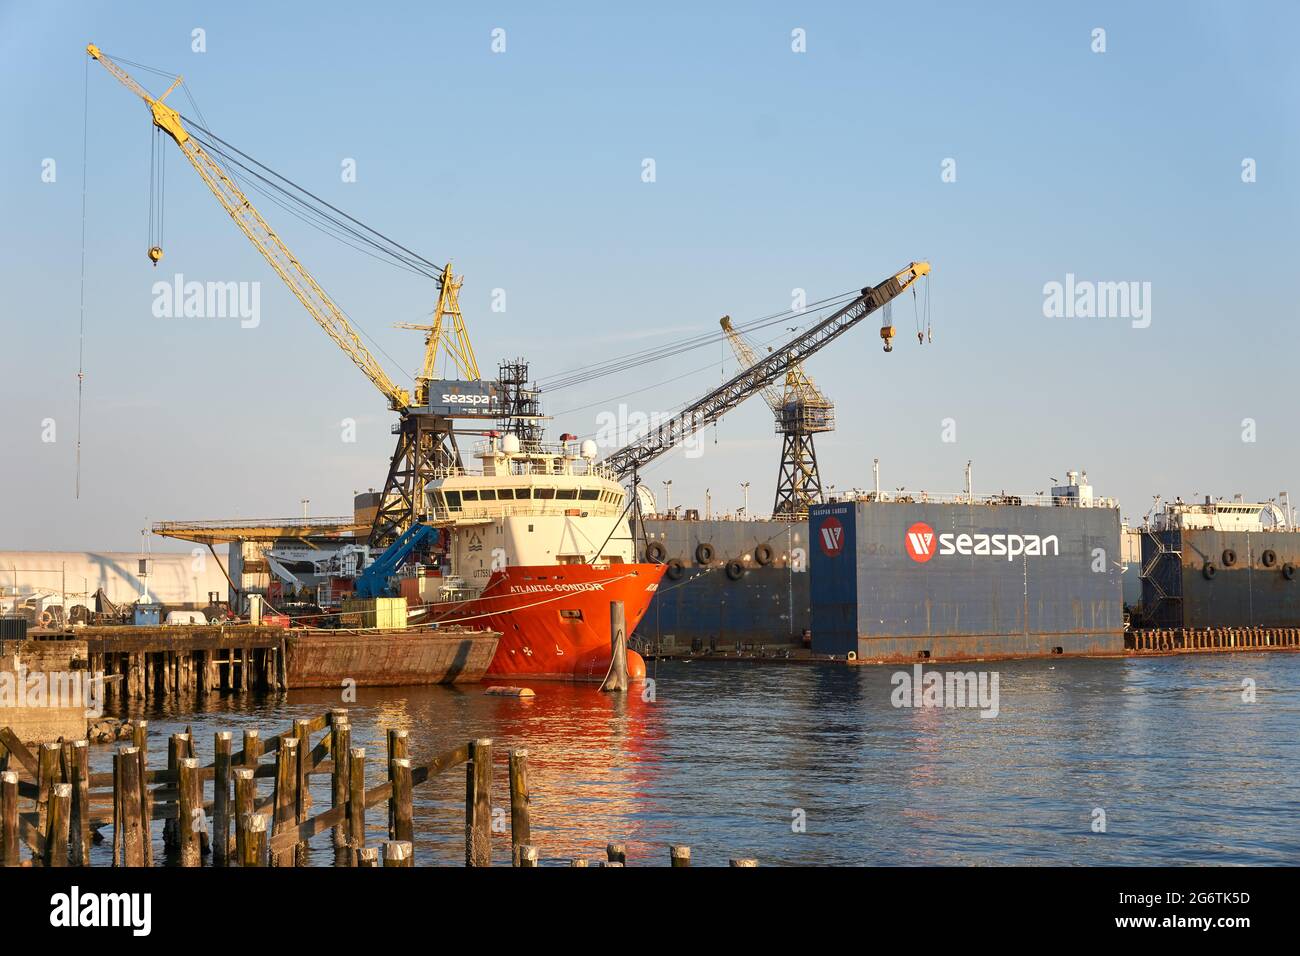 The Atlantic Condor offshore supply ship and tug docked at the Vancouver Drydock facility in  North Vancouver, British Columbia, Canada Stock Photo